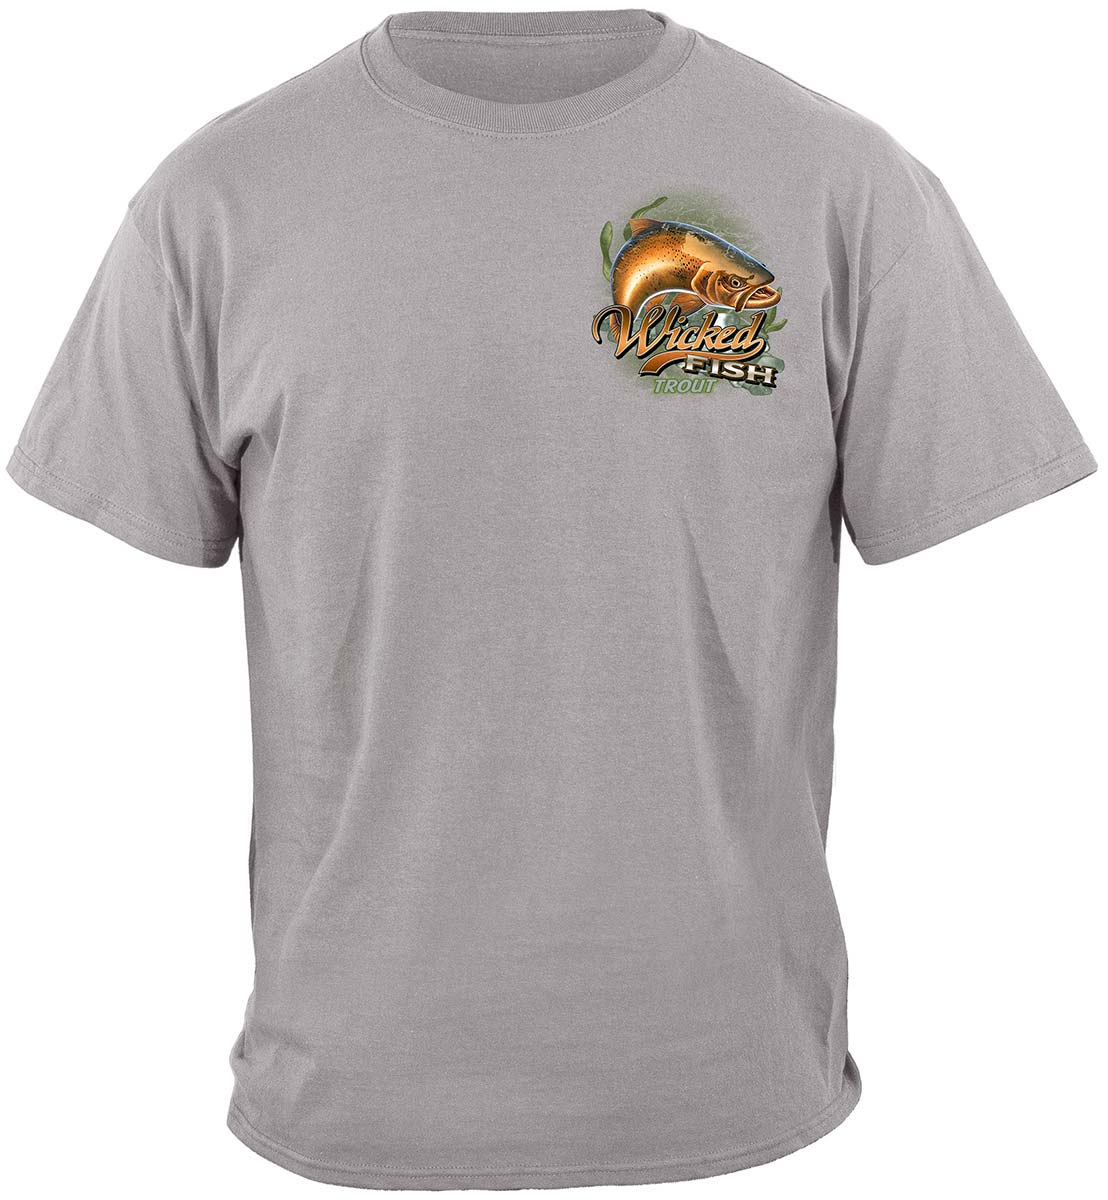 Wicked Fish Trout Premium T-Shirt